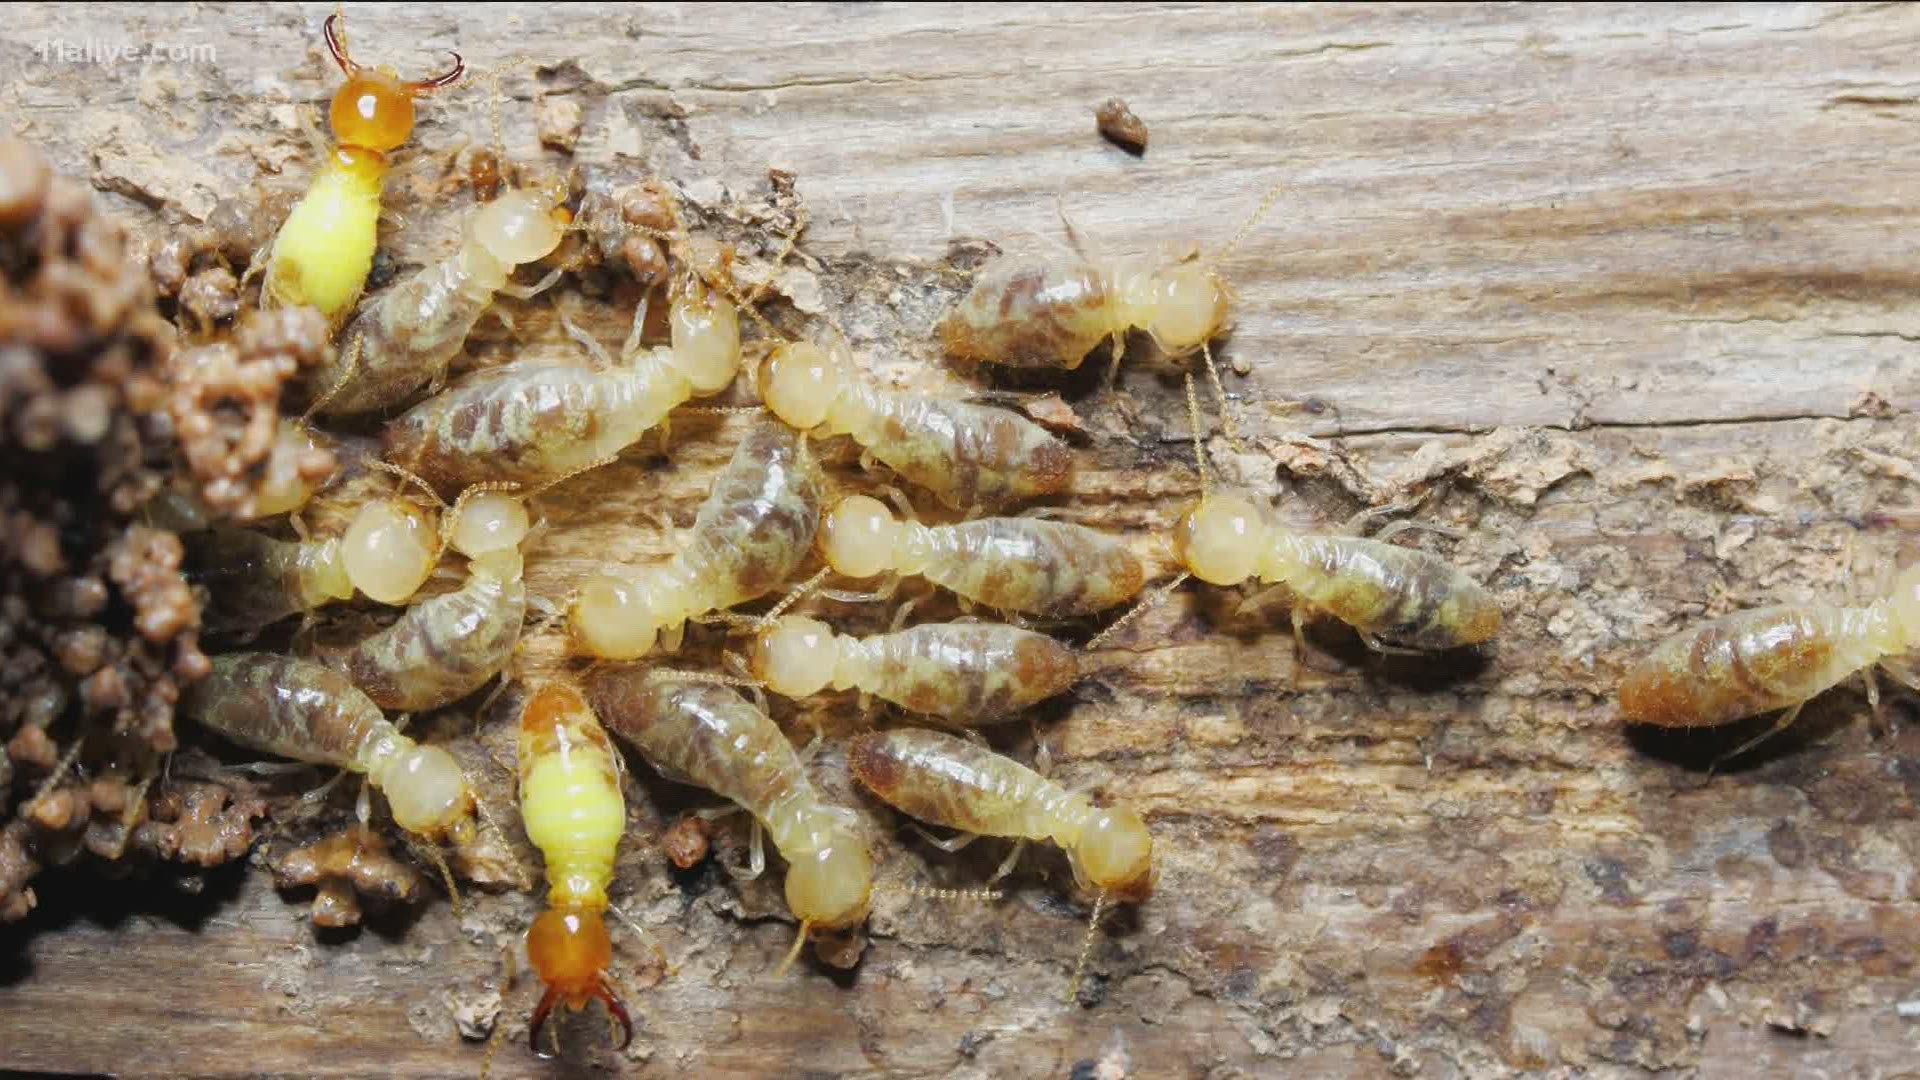 Termites cause nearly $40 billion in damages worldwide.